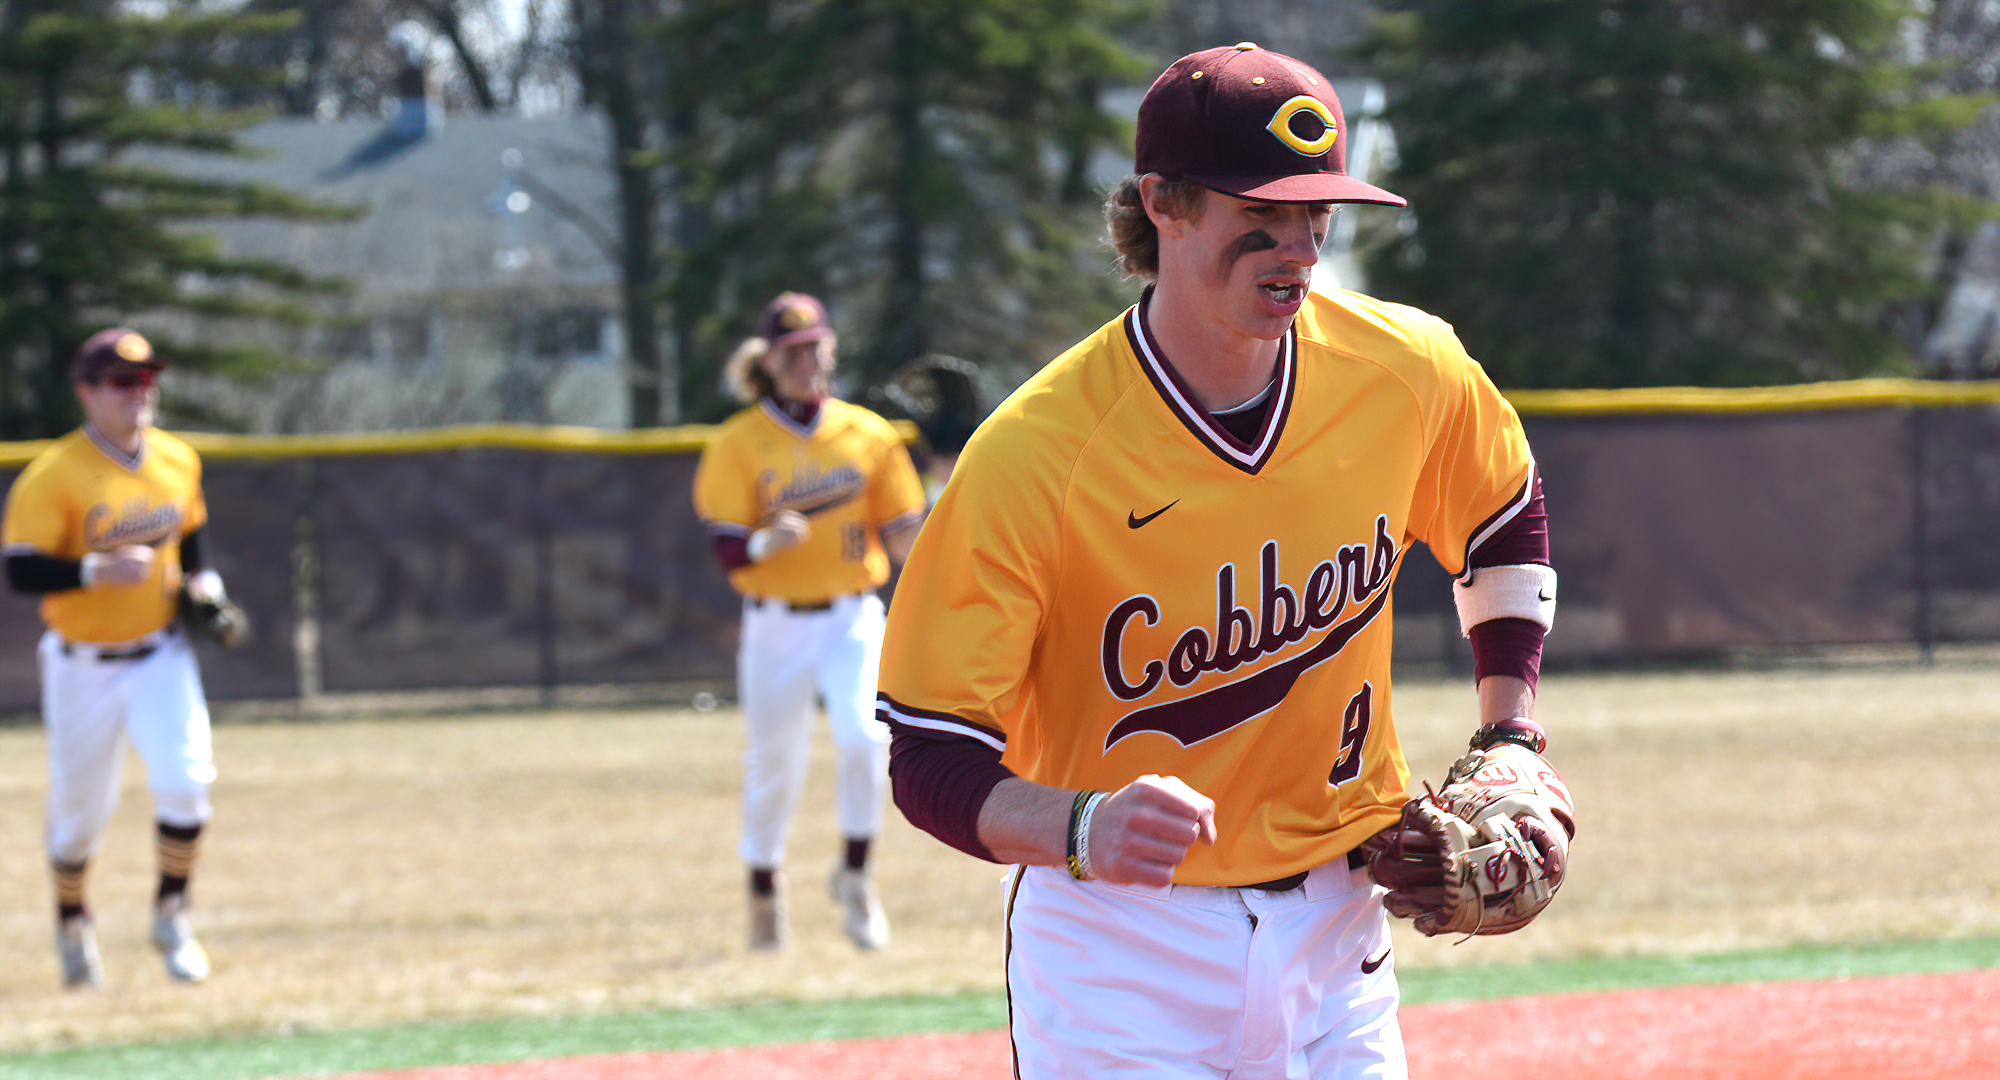 Thomas Horan had multiple-hits in both games of the Cobbers' split at St. John's. He went 5-for-8 with 2 RBI and is now hitting .323.